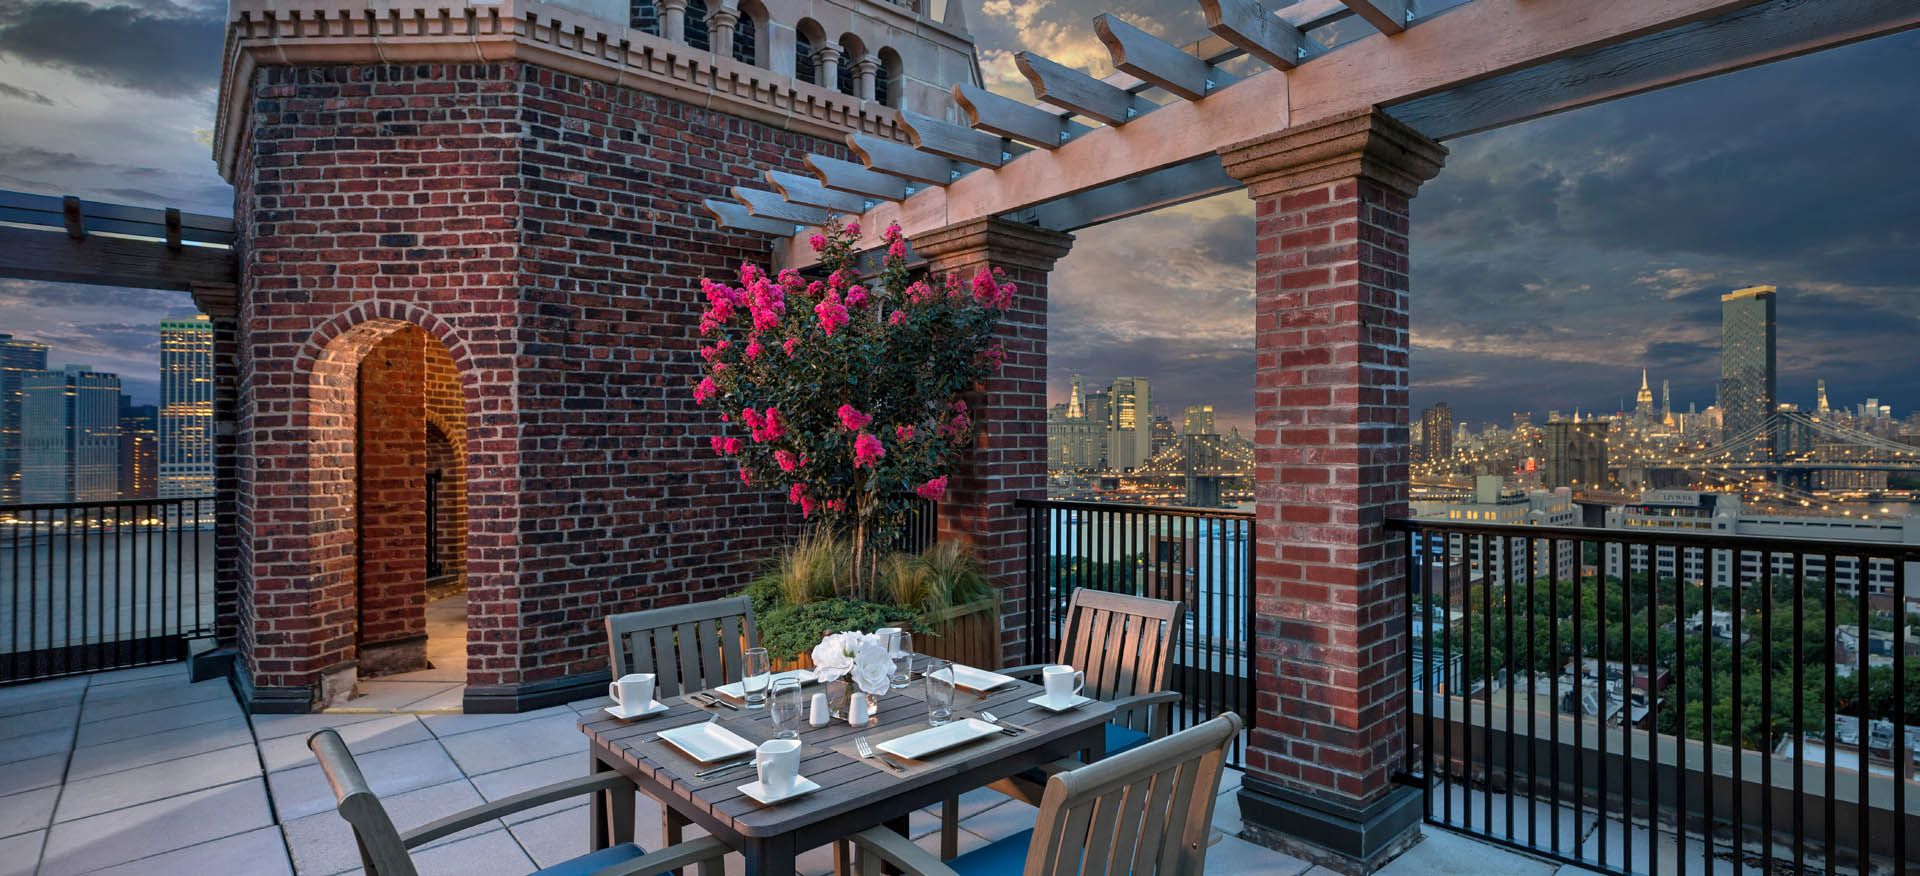 Senior living community, The Watermark at Brooklyn Heights, showcasing outdoor scenery, architecture, and dining area.